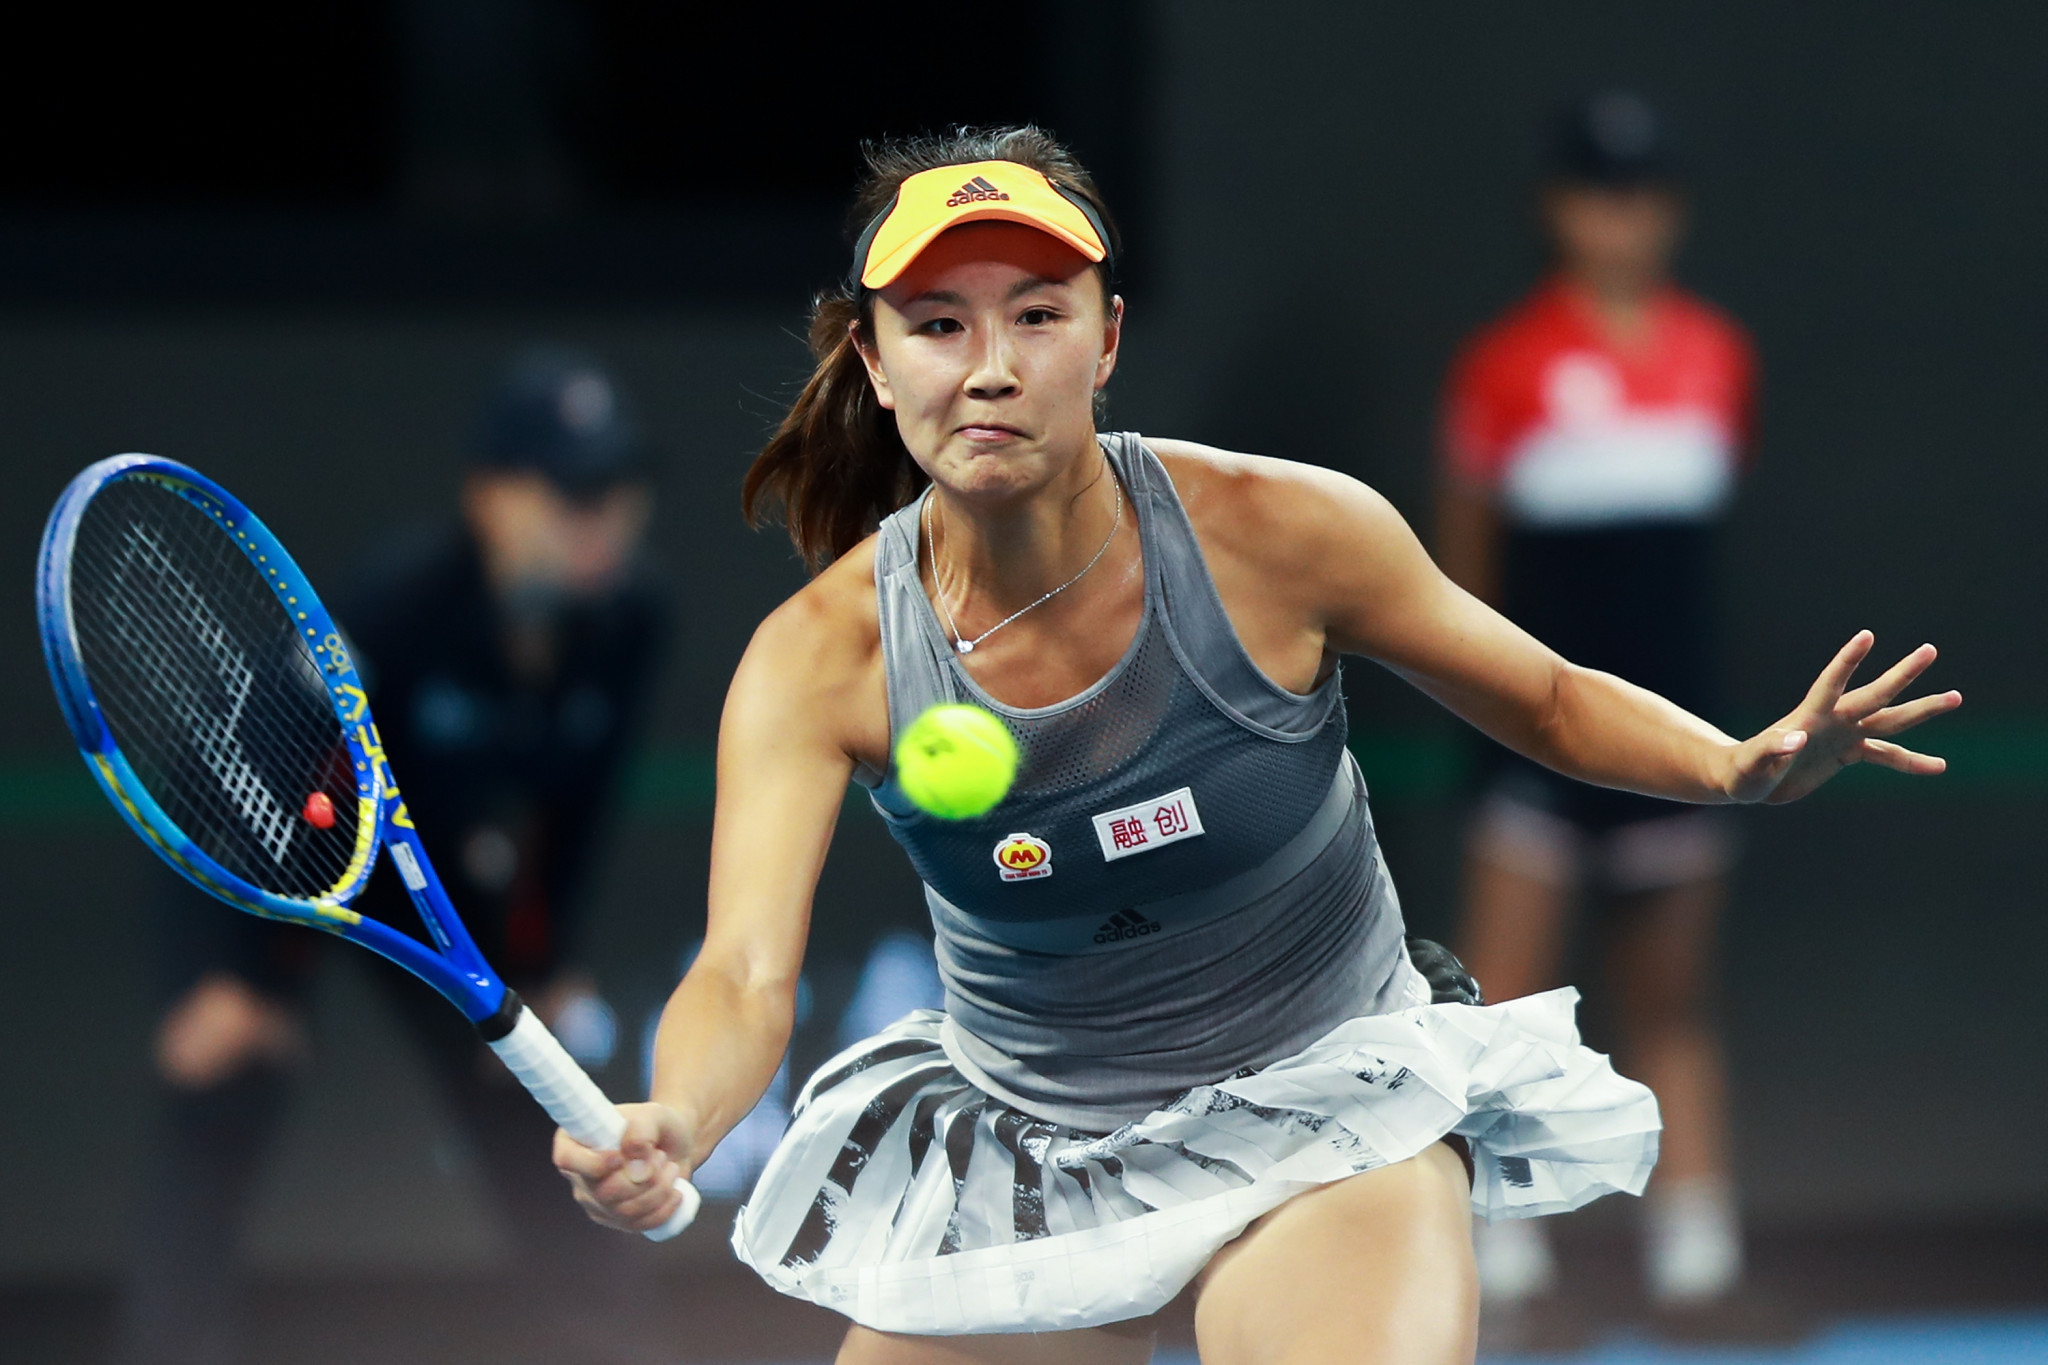 WTA still has "significant concerns" after Peng reportedly retracts sexual assault claim